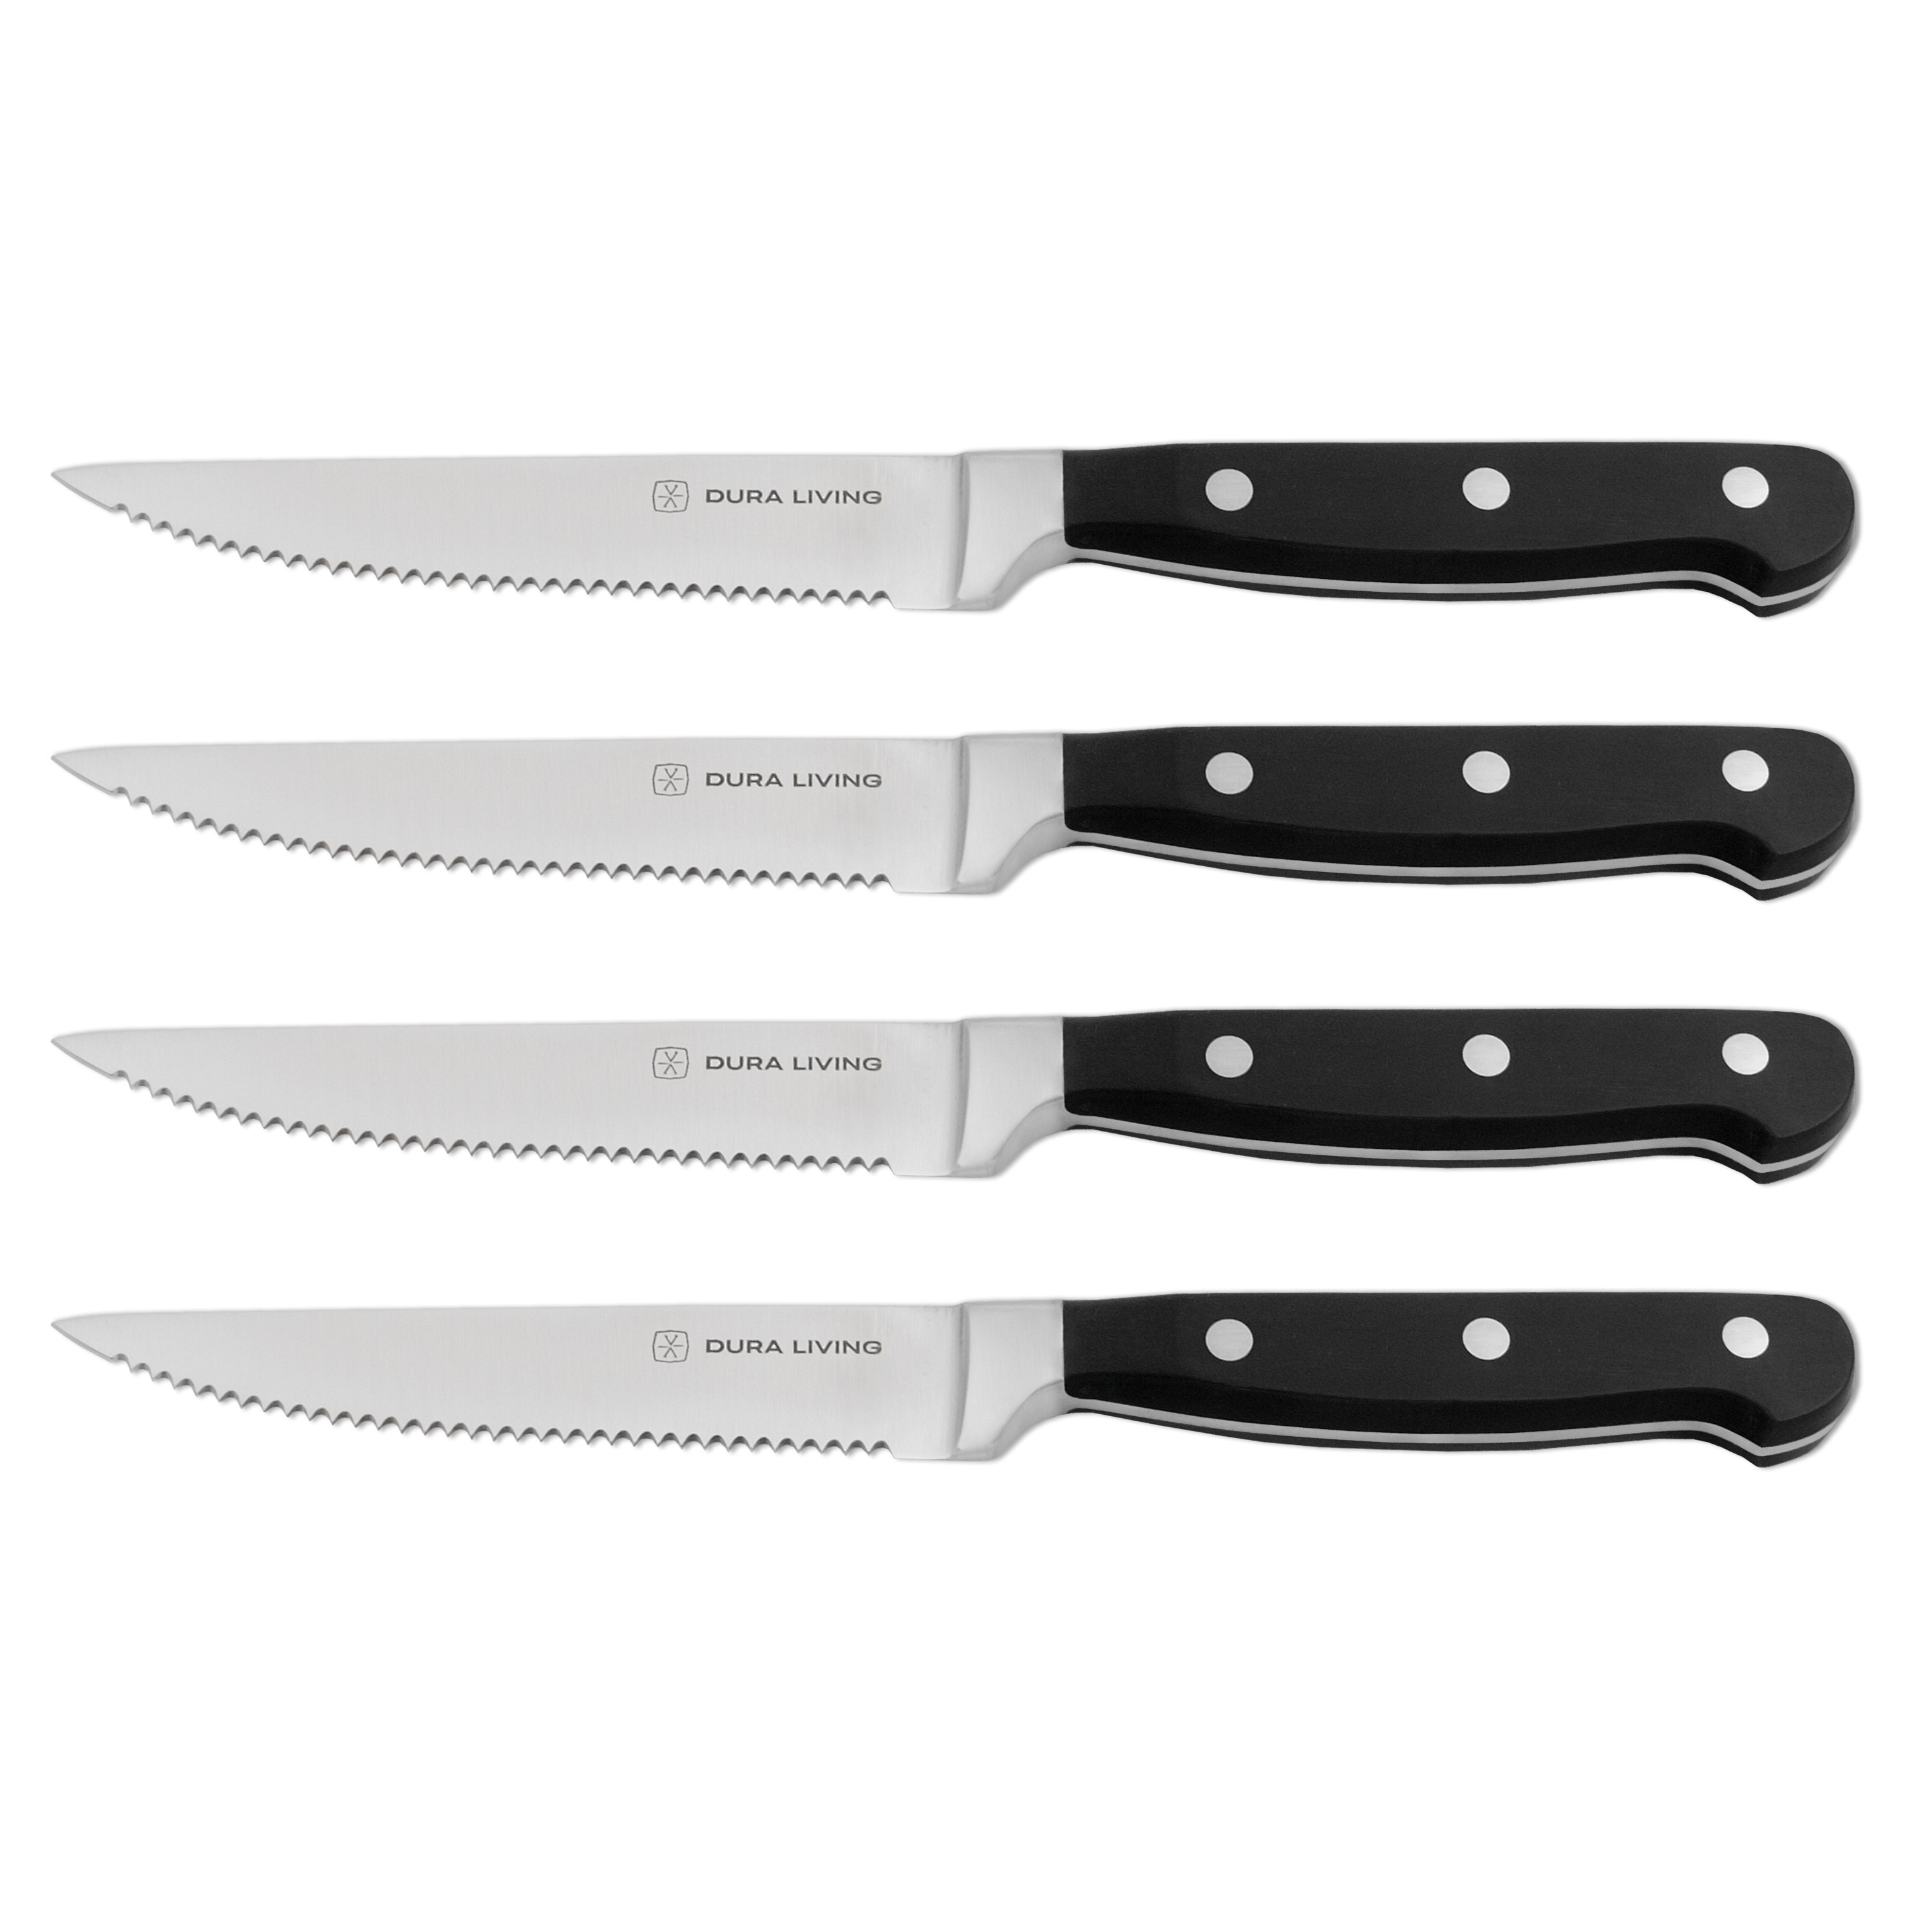 https://ak1.ostkcdn.com/images/products/is/images/direct/413d1c6951322b419d2ad64e0d2219d799807060/Dura-Living-Superior-Steak-Knife-Set-of-4---Forged-Stainless-Steel-Serrated-Blades%2C-Black.jpg